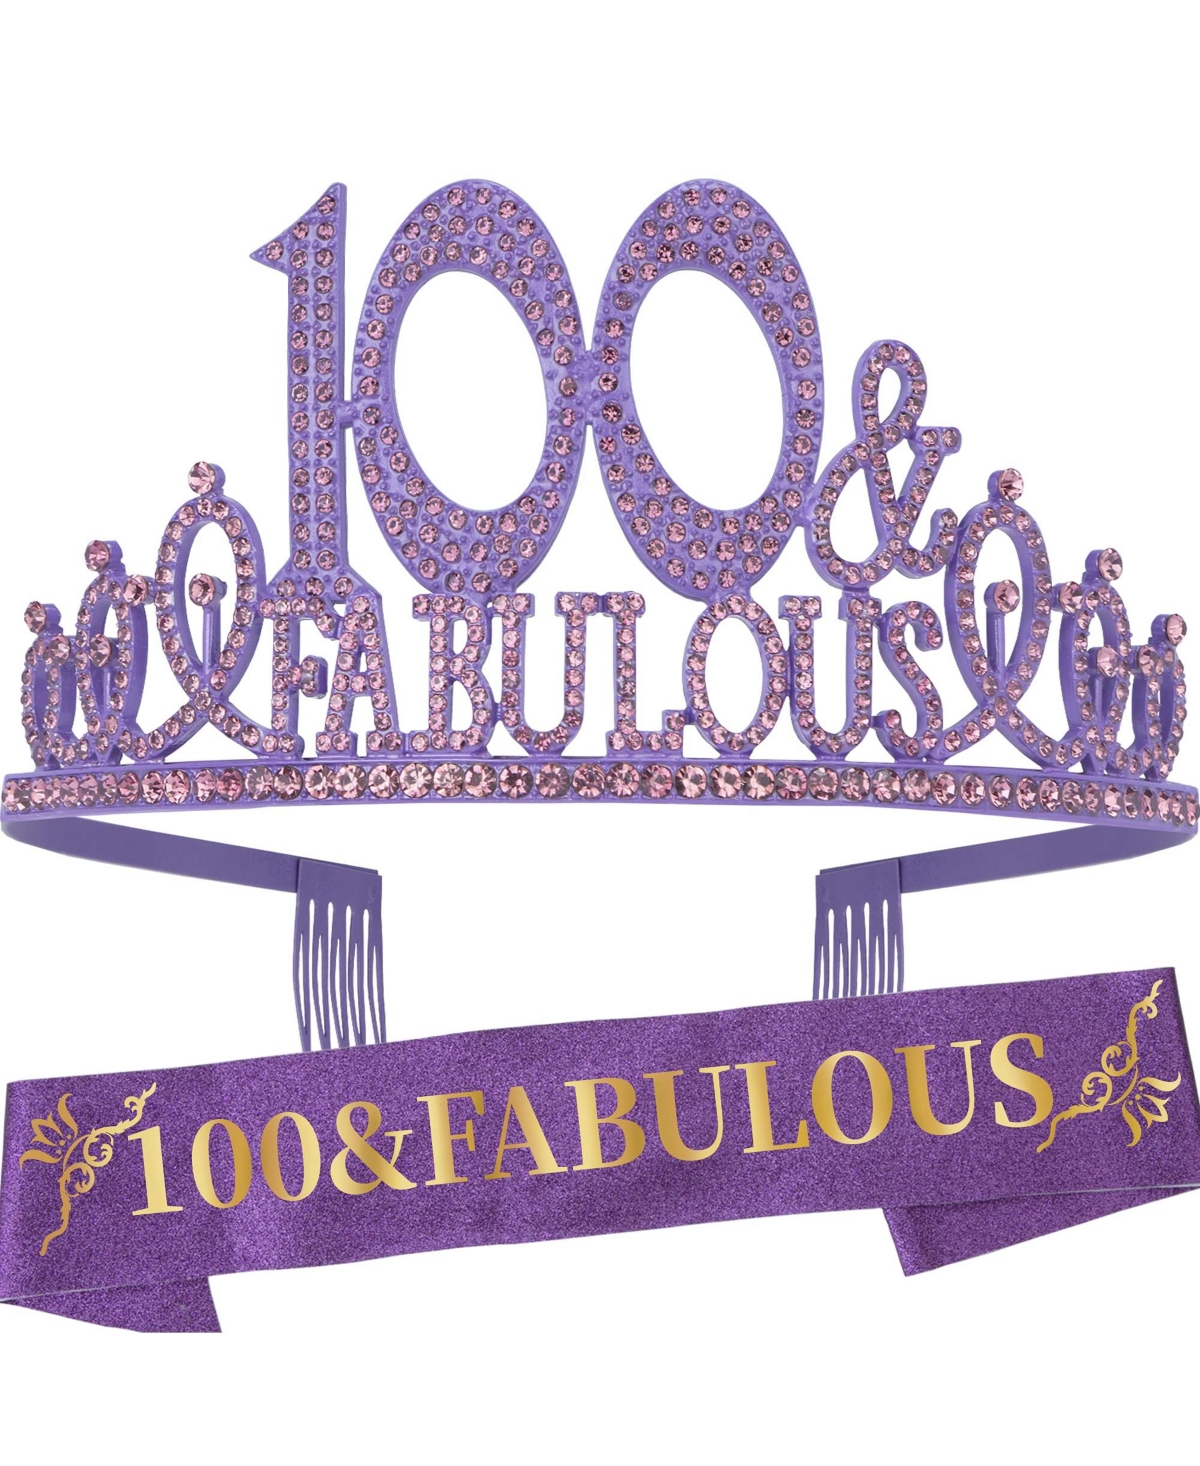 100th Birthday Celebration Set: Gifts for Women, Crown, Decorations, Party Supplies, Tiara, and Banner - Perfect for a Memorable Milestone Birthday -